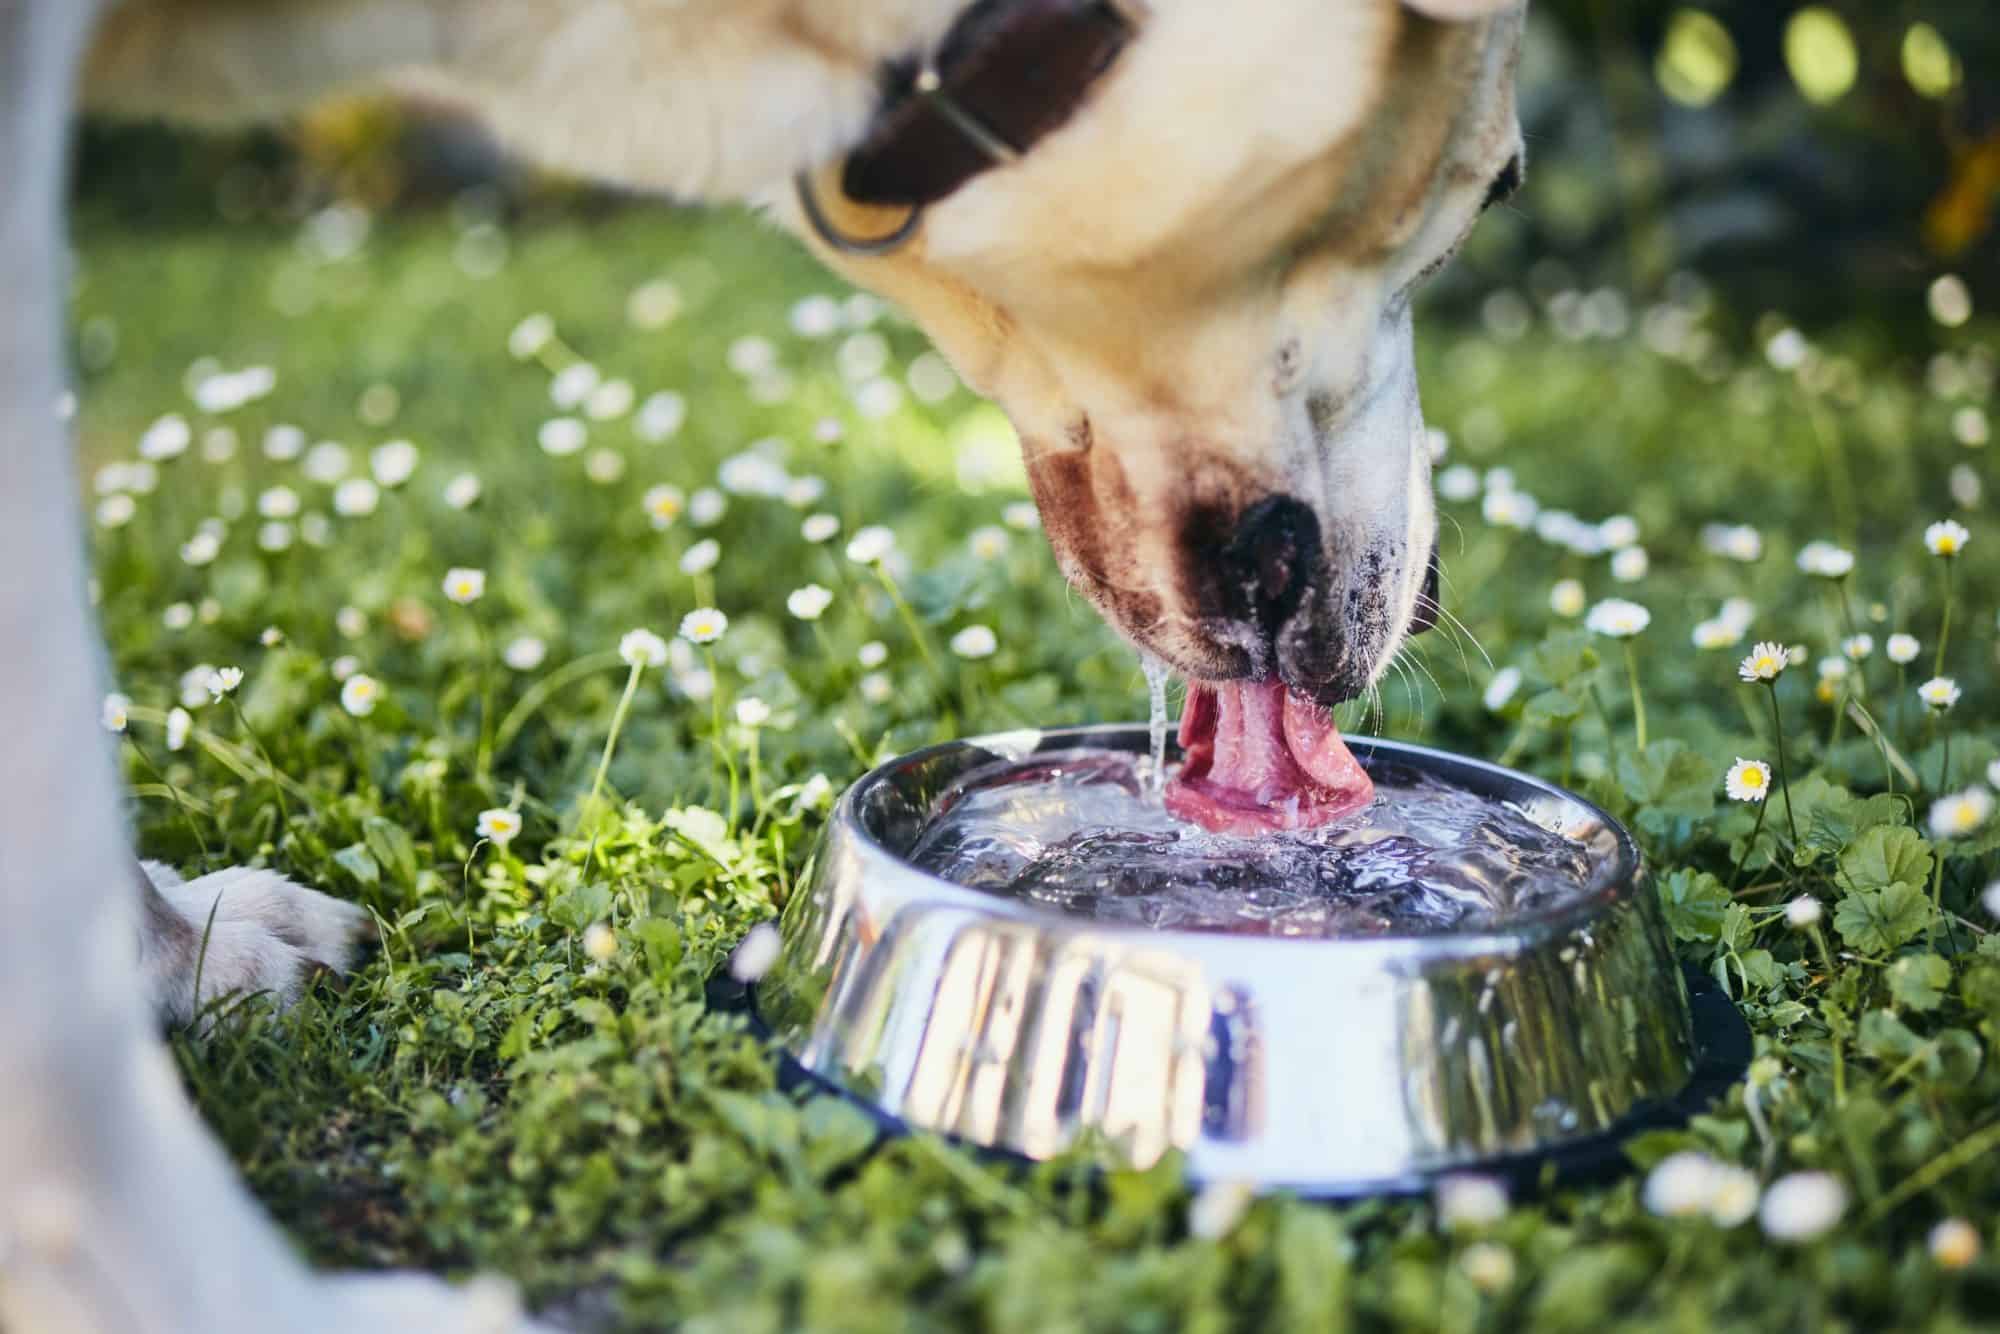 Thirsty dog in hot summer day. Labrador retriever drinking water from metal bowl.